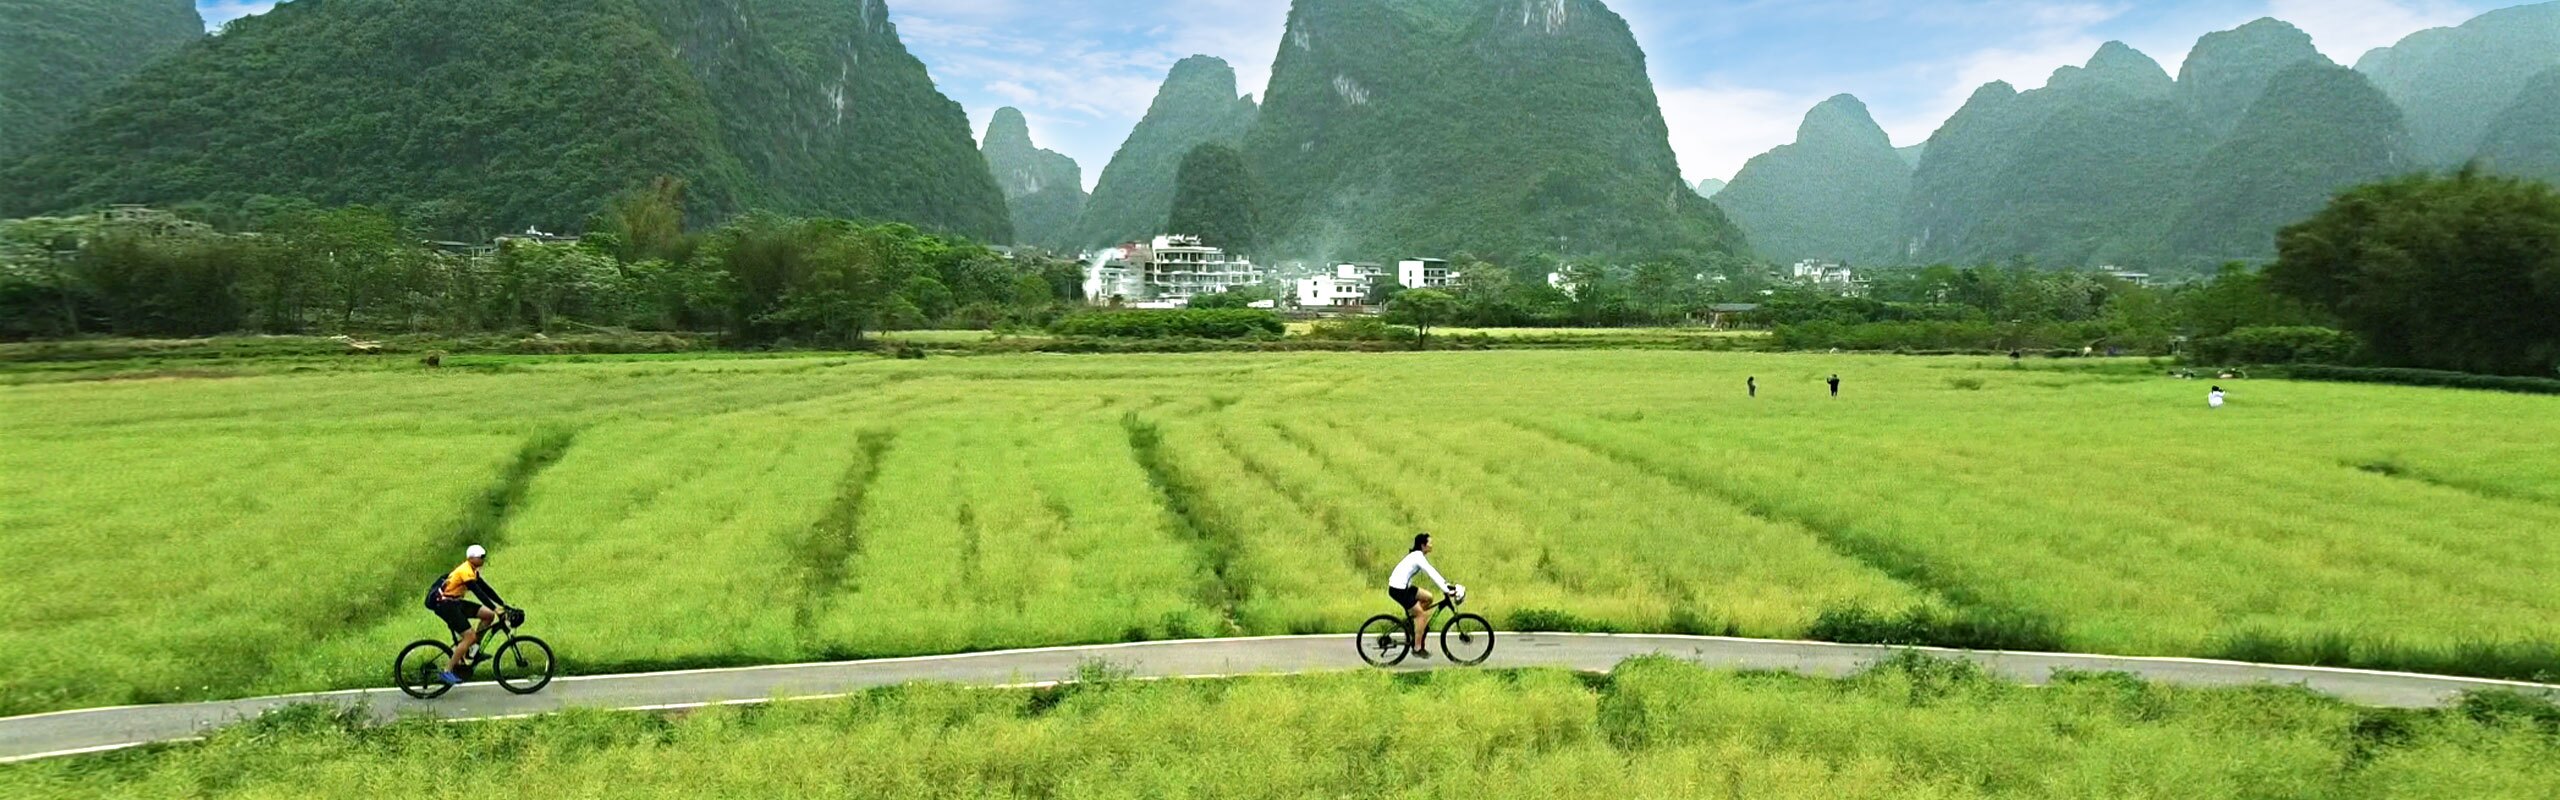 5-Day Picturesque Guilin Biking Tour